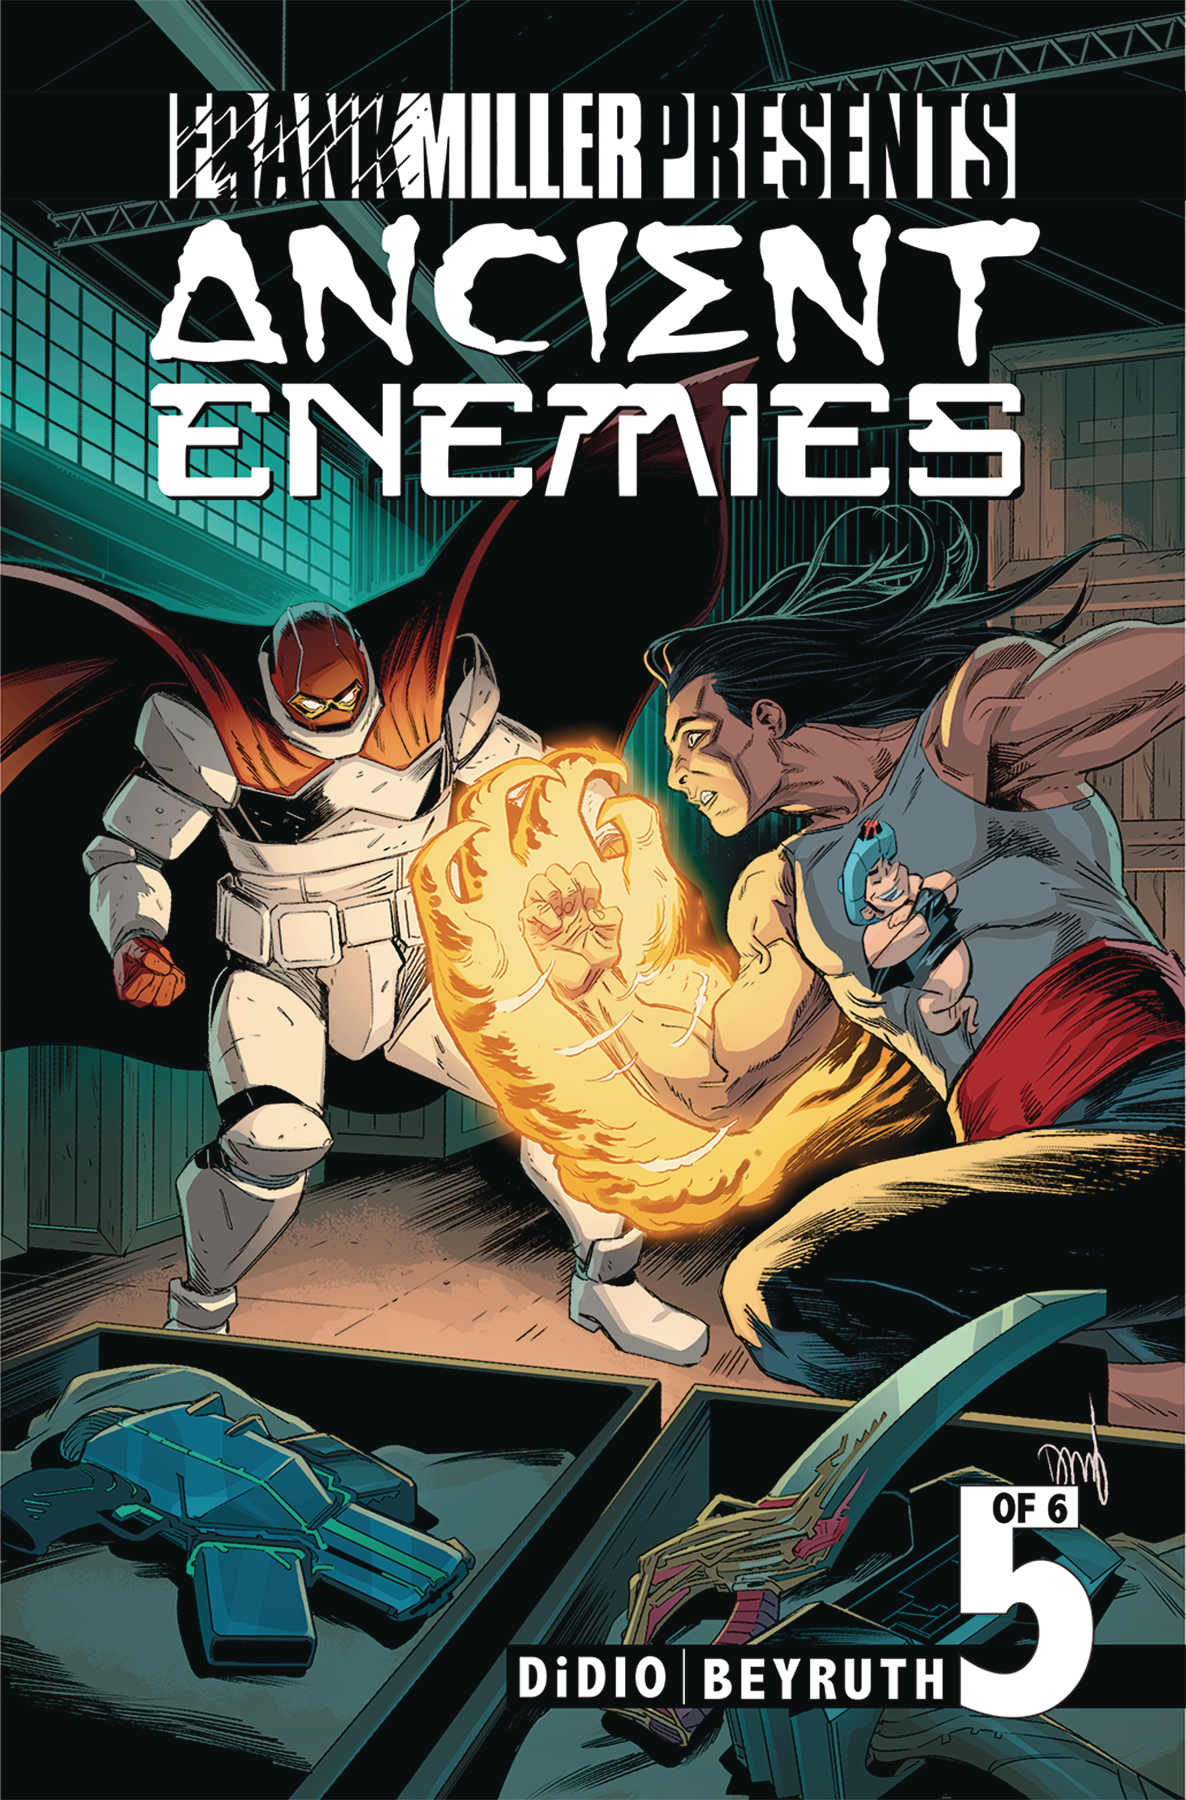 Ancient Enemies #5 Cover A Beyruth (Of 6)